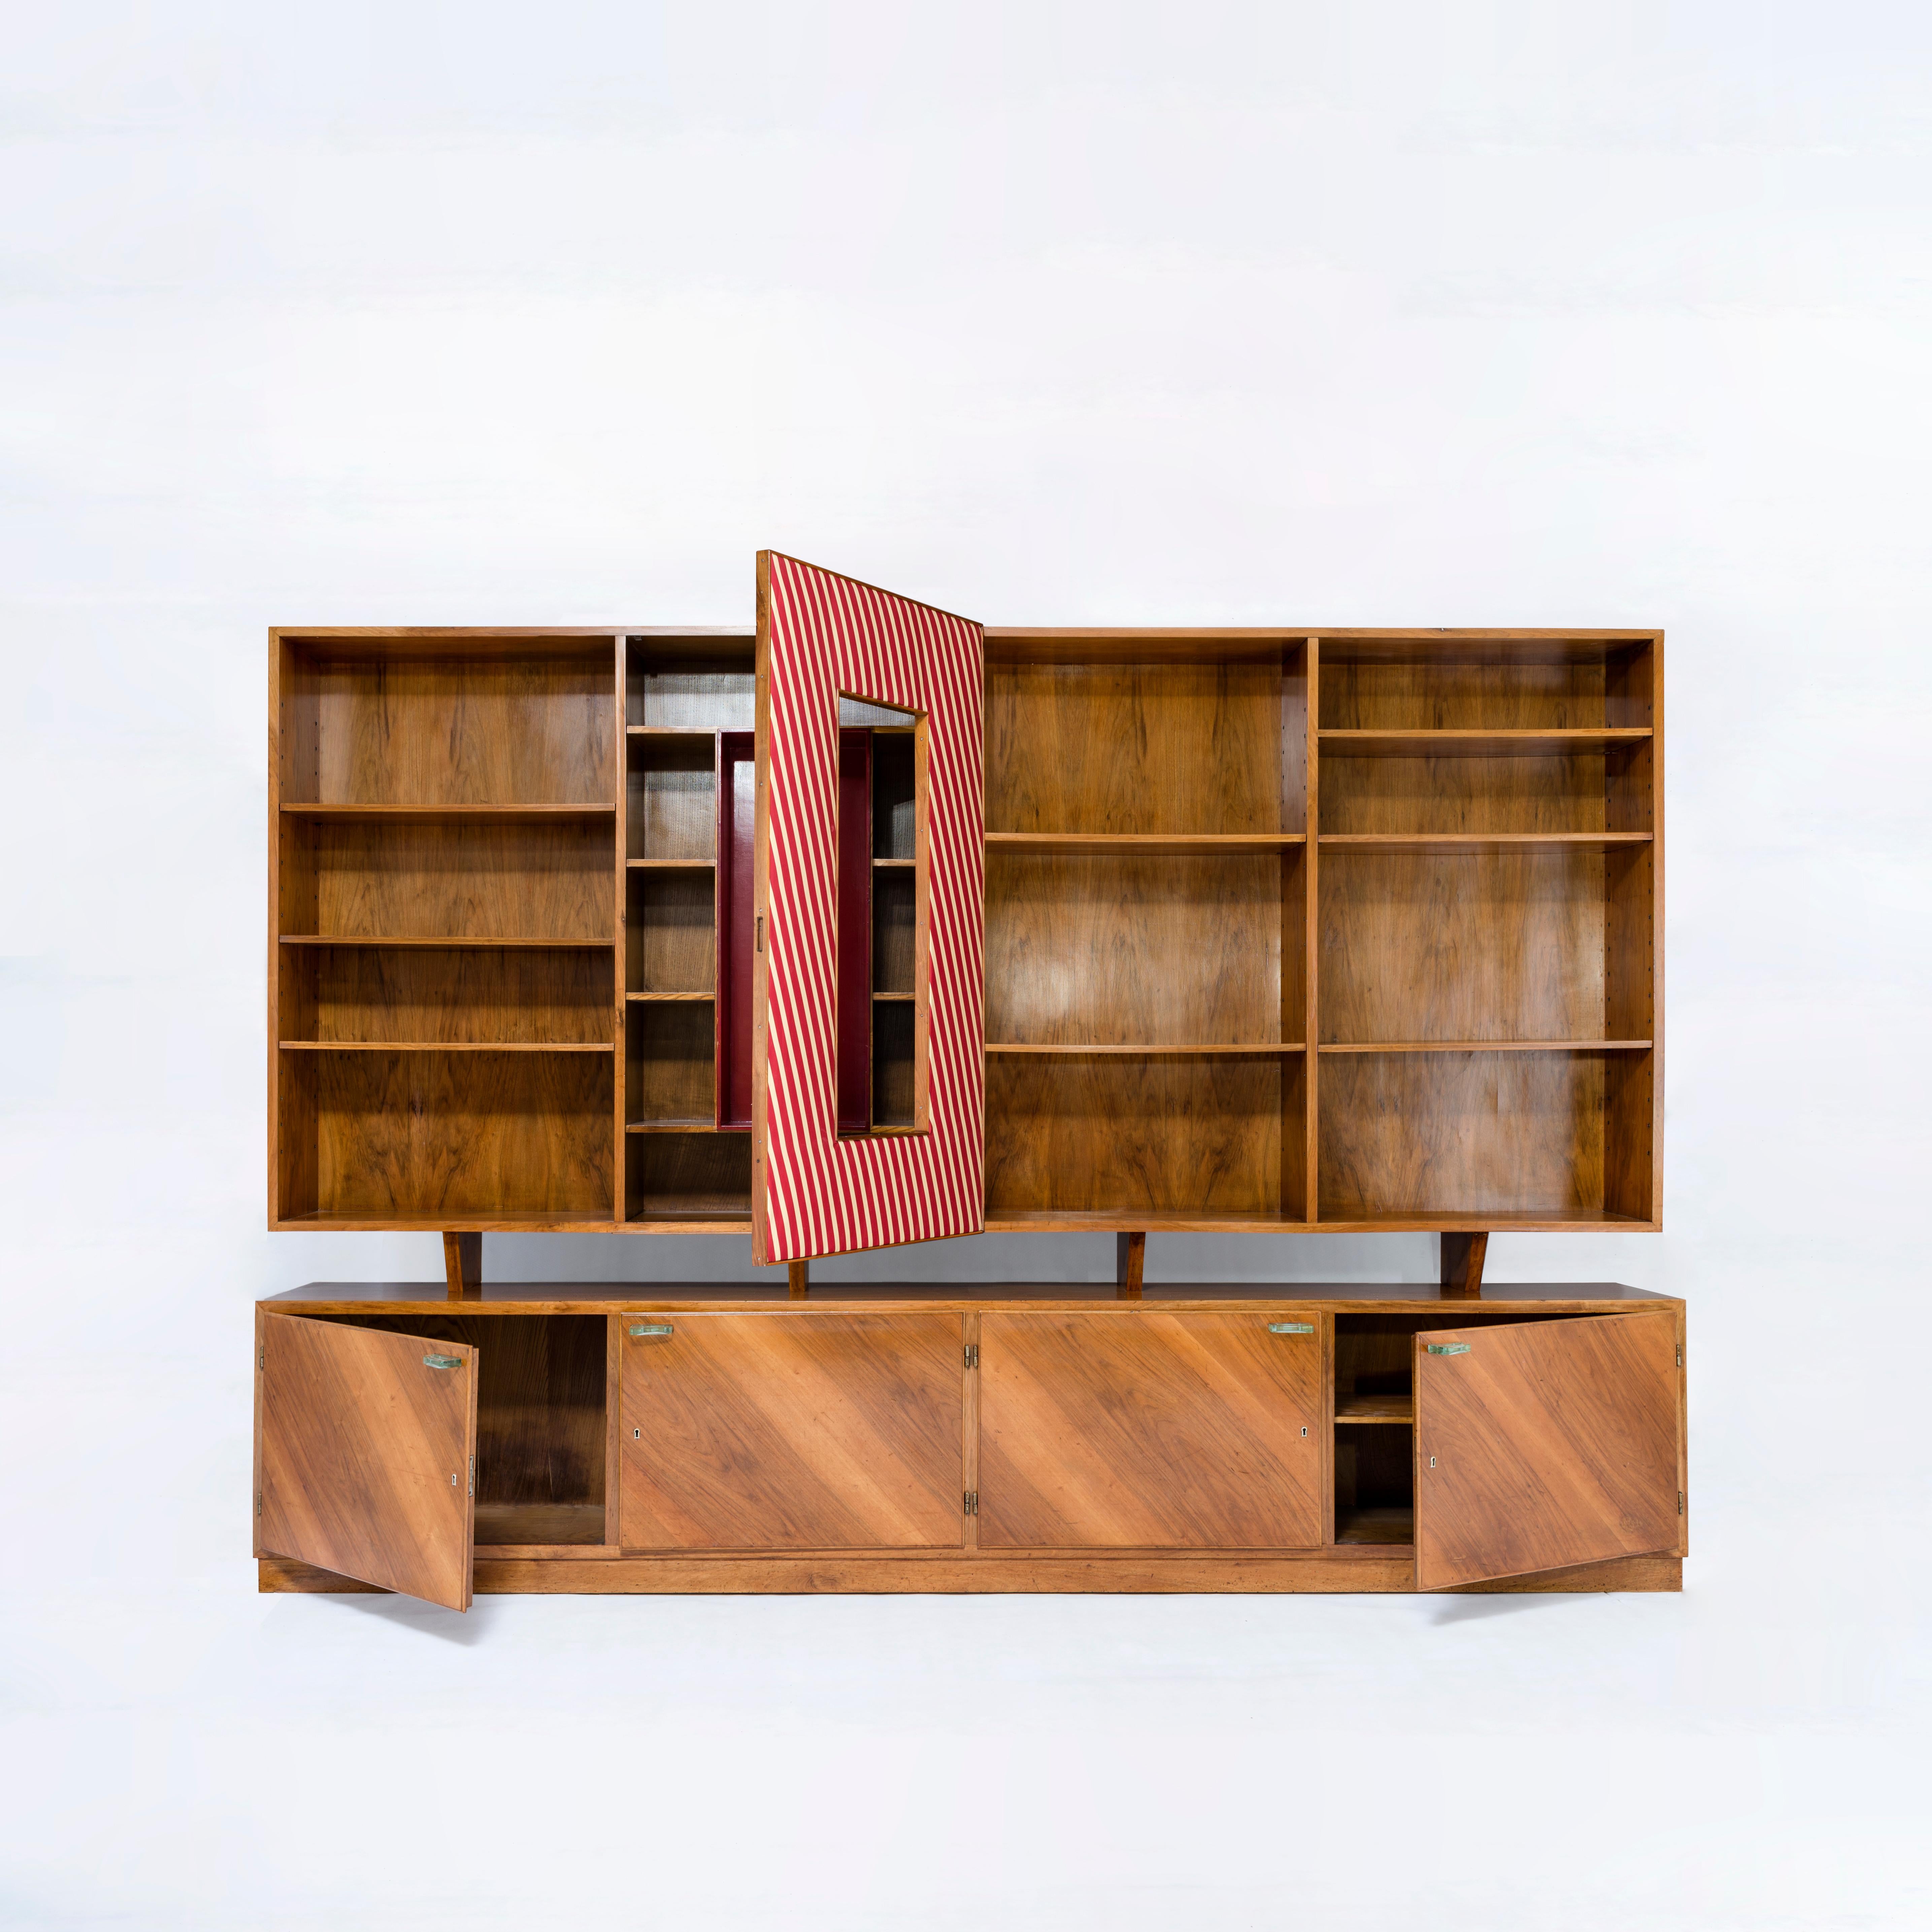 Gio Ponti
Library from the private residence of an Italian collector
A certificate of expertise from the Gio Ponti archives is provided.
Walnut, silk, glass
Handles by Fontana Arte
Central doors upholstered in striped silk.